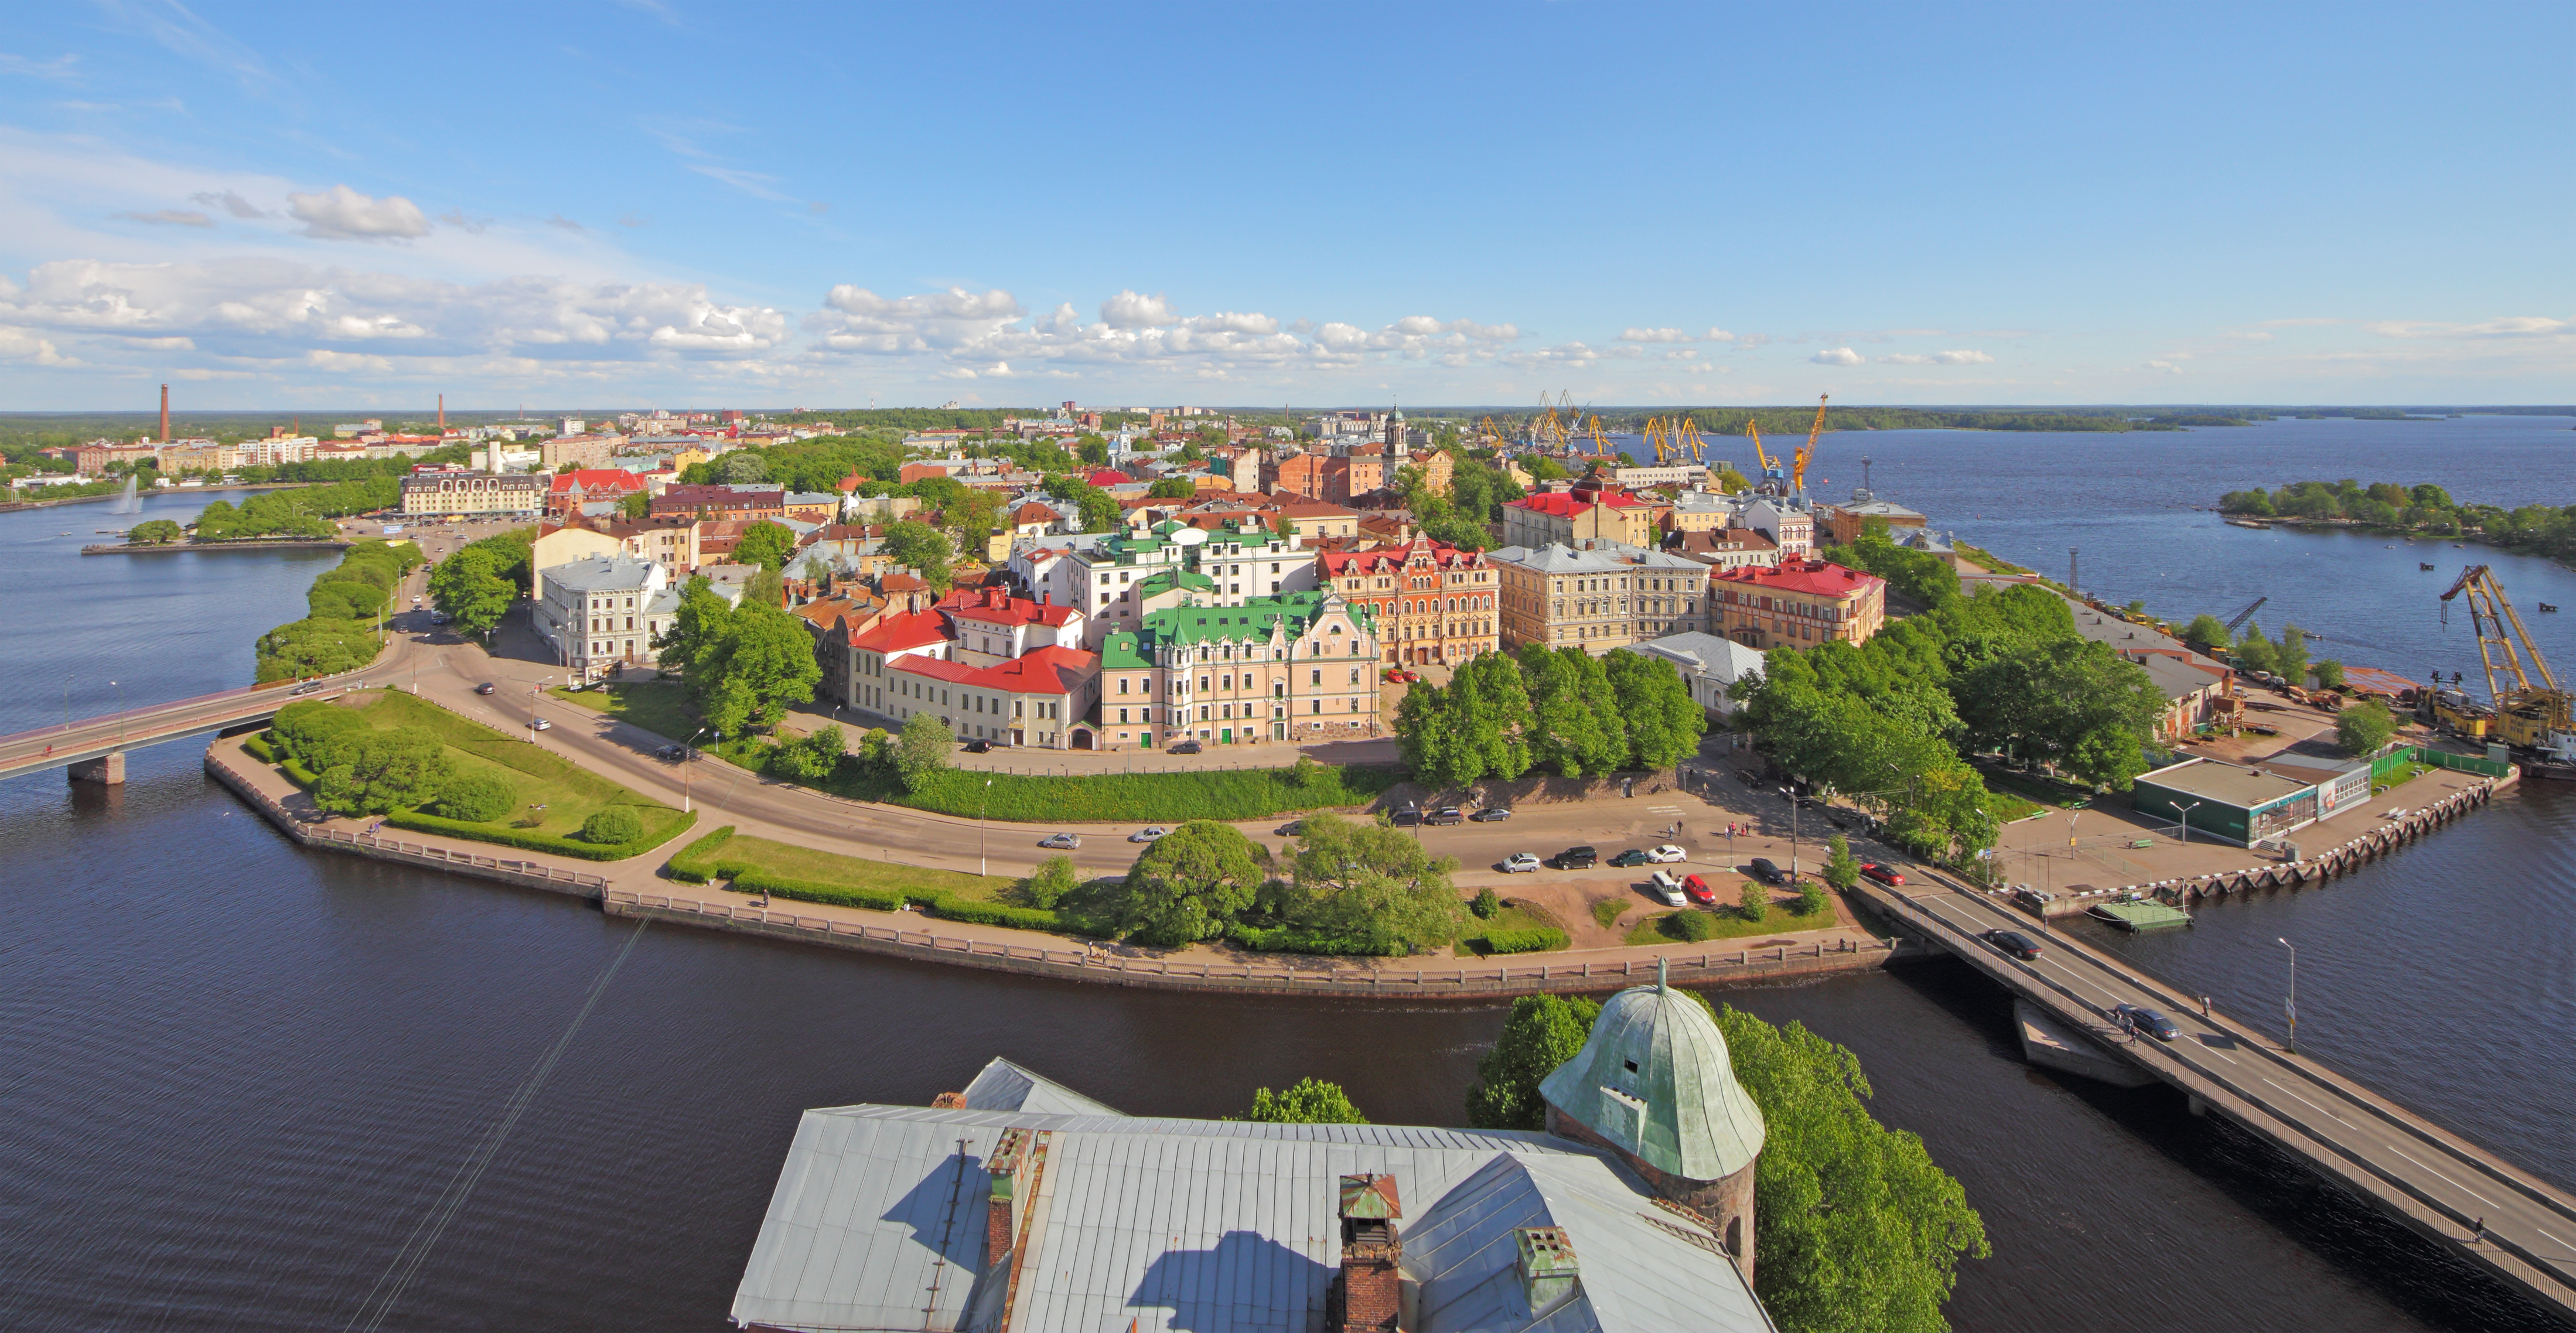 Vyborg_June2012_View_from_Olaf_Tower_06.jpg